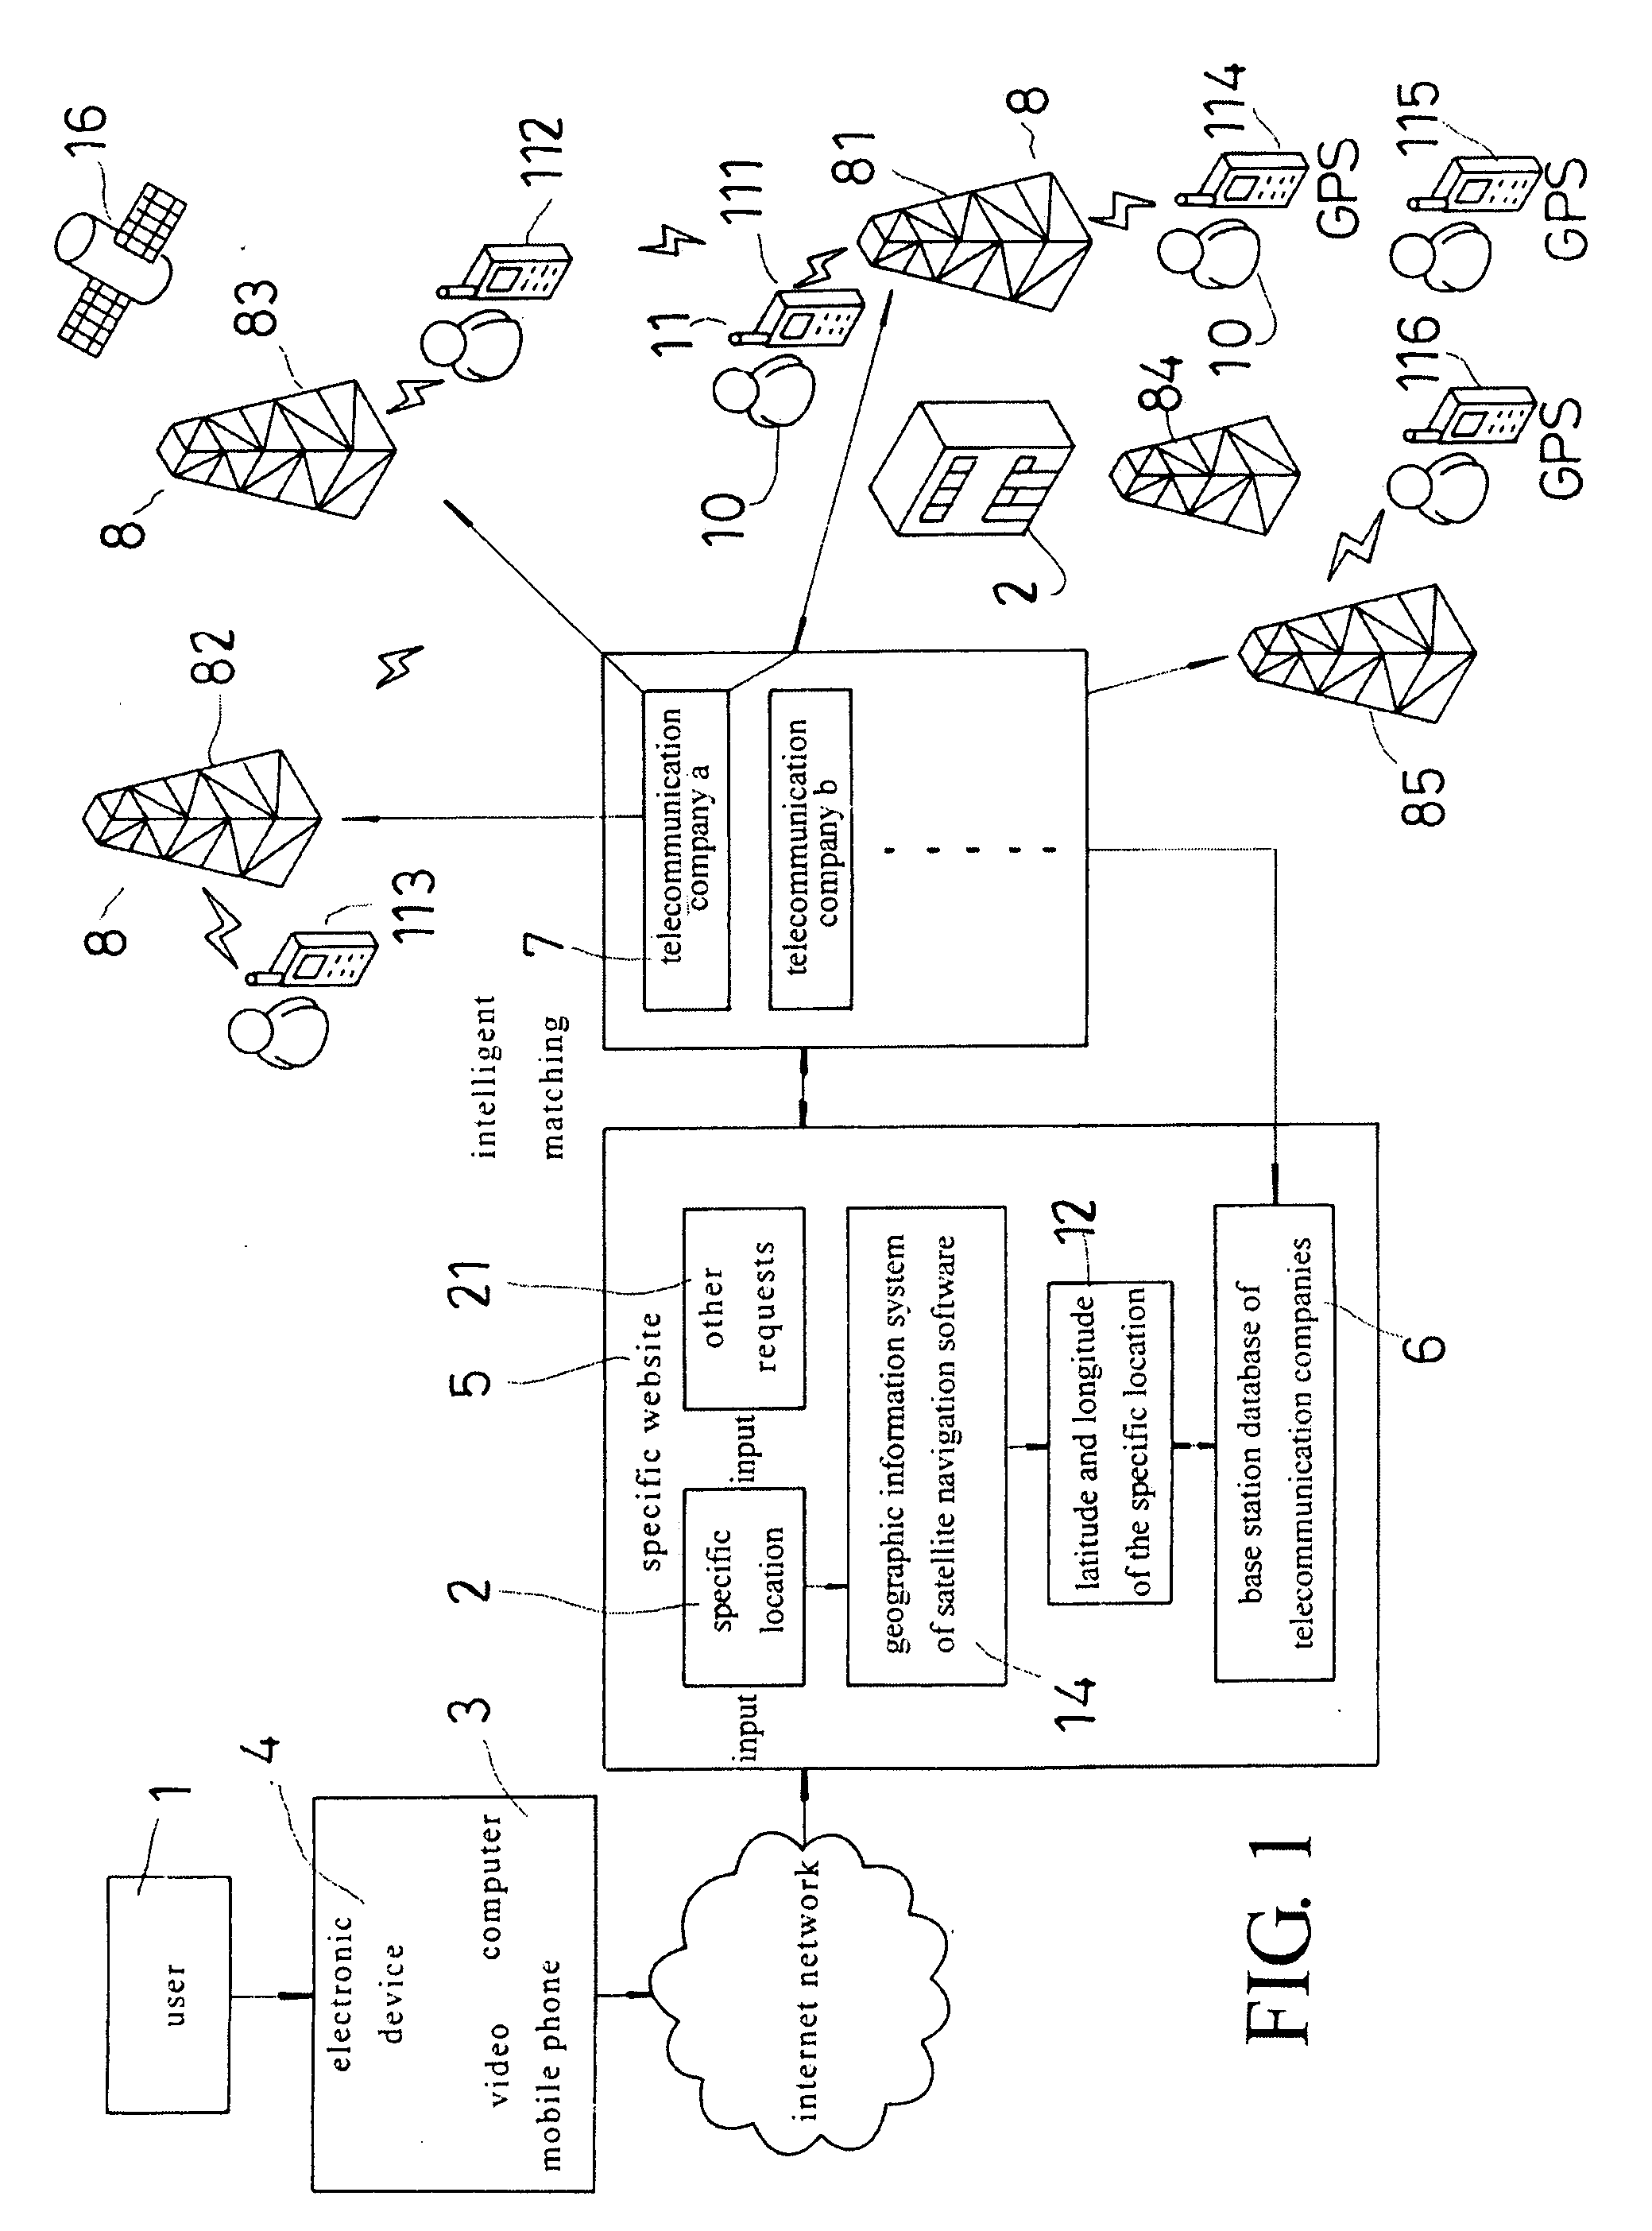 Method for capturing real-time video and audio data at specific location